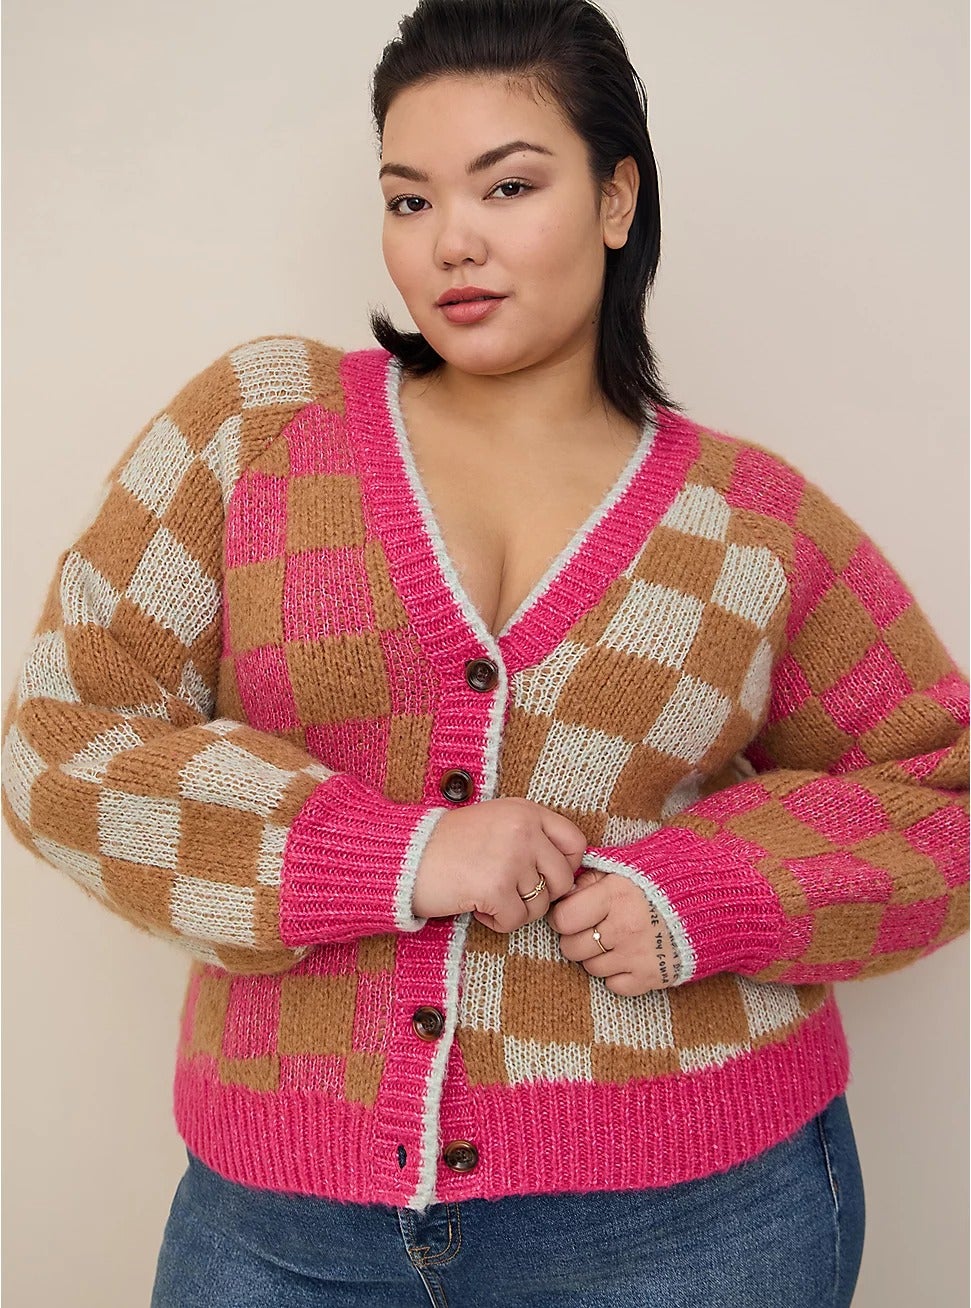 a model posing in the pink and brown checked sweater